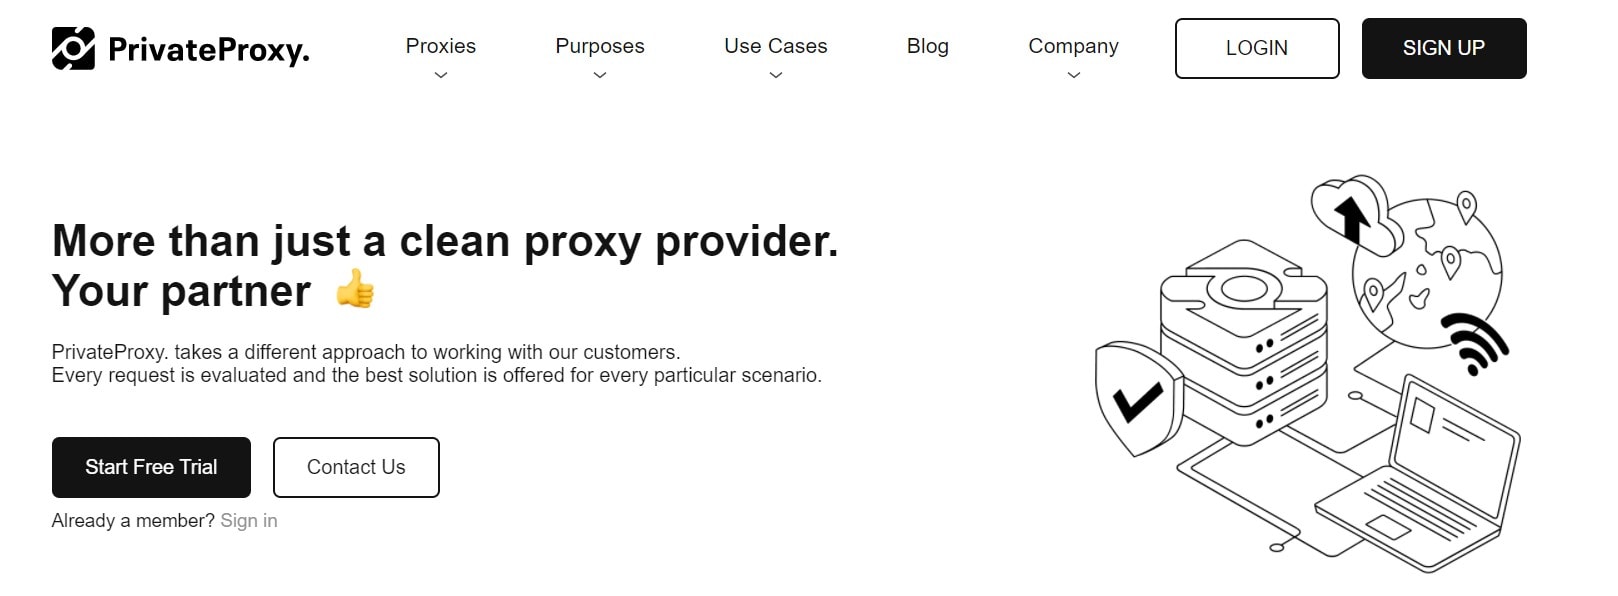 PrivateProxy.me Review 